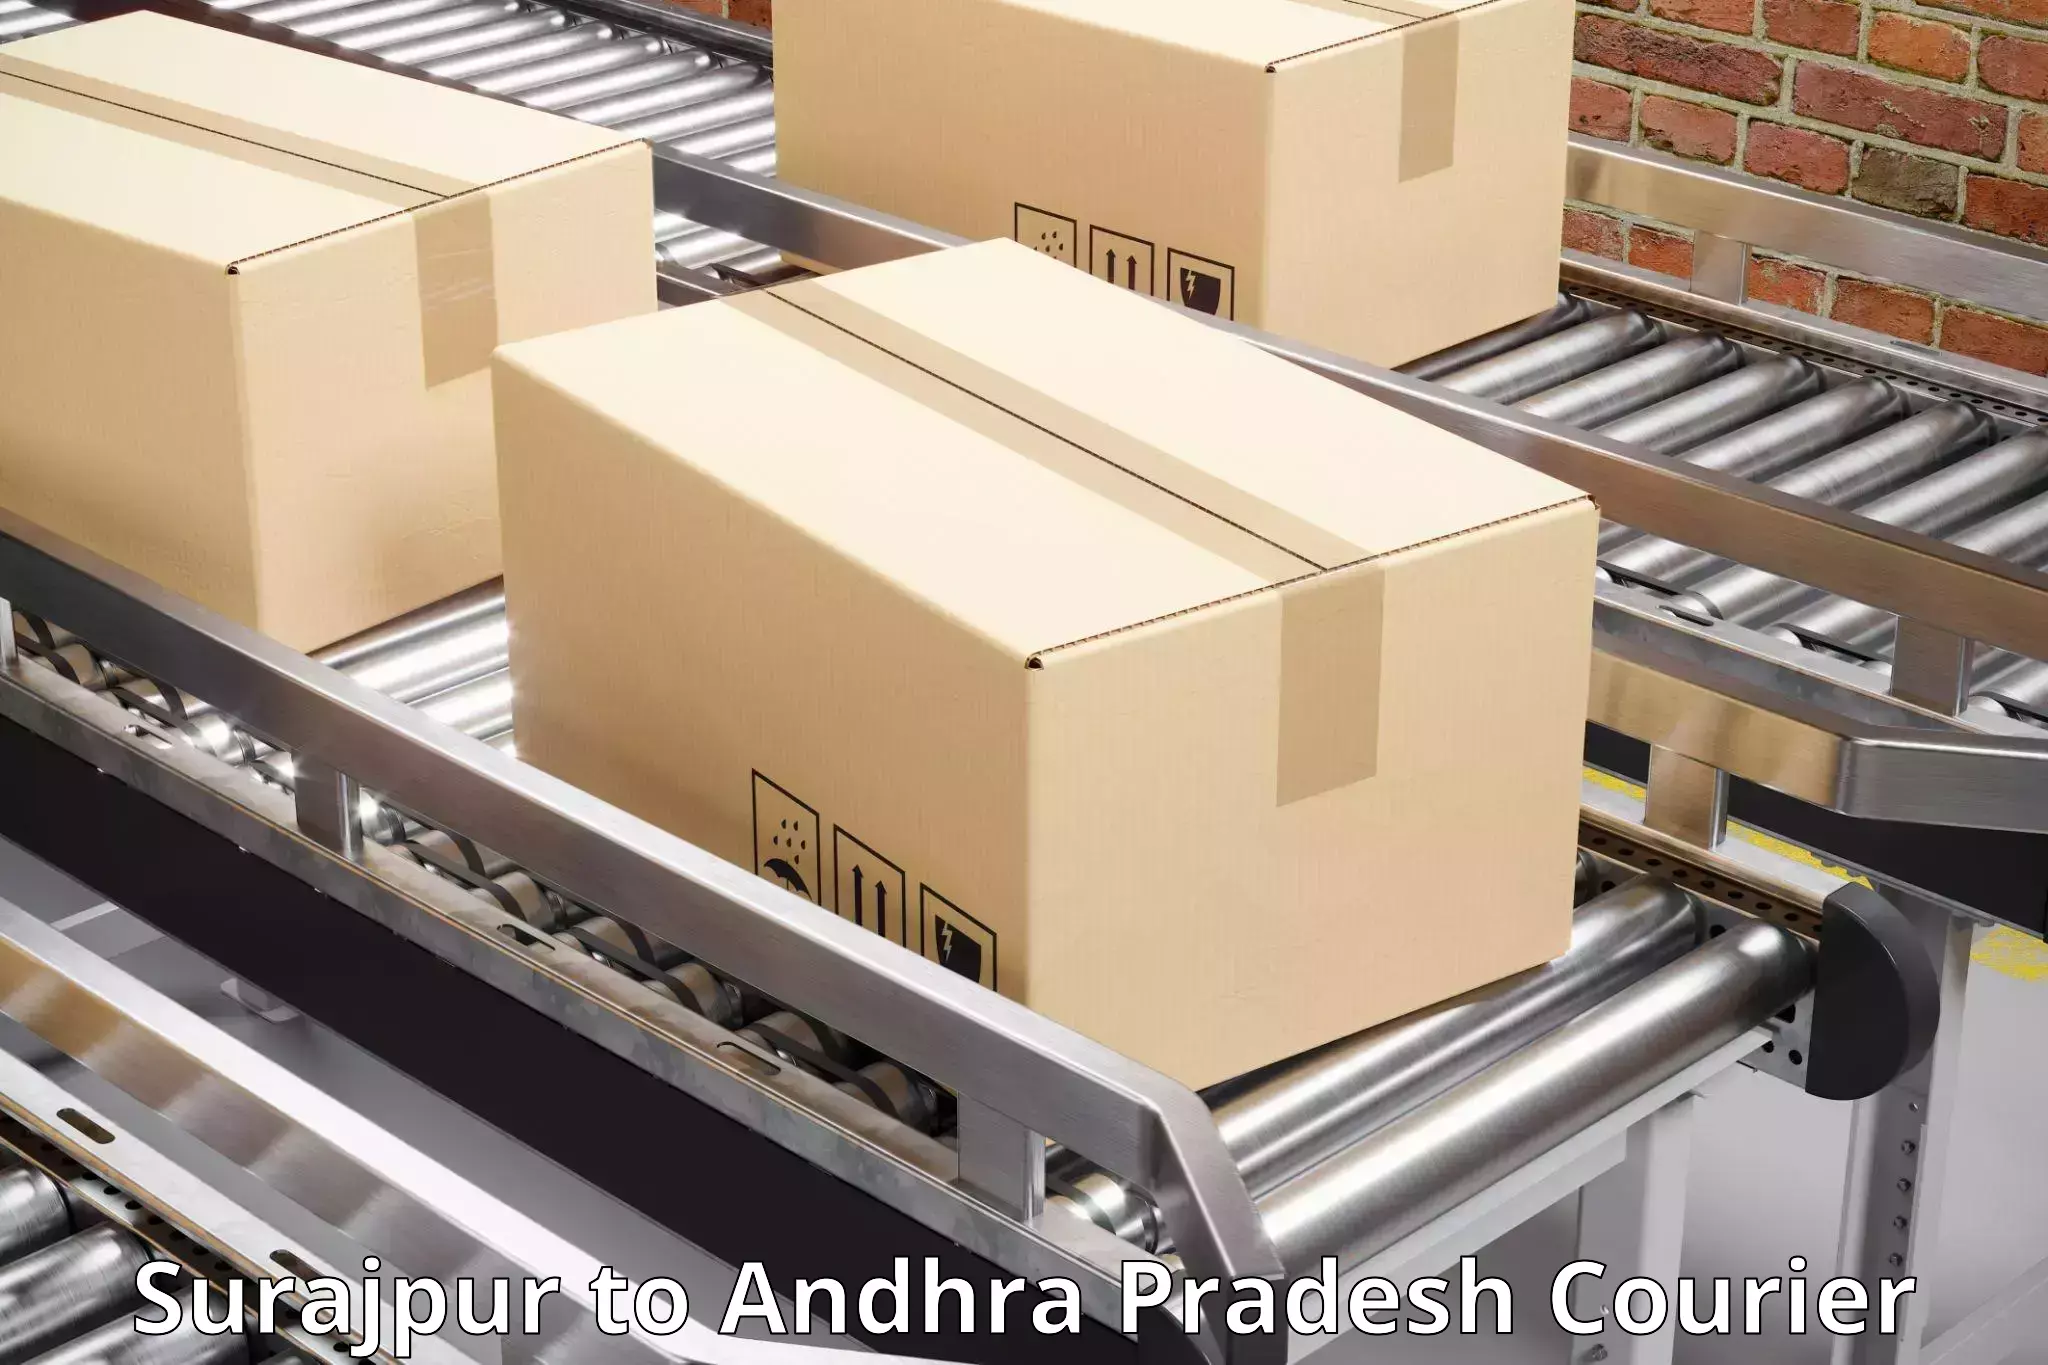 24/7 shipping services in Surajpur to Yellamanchili